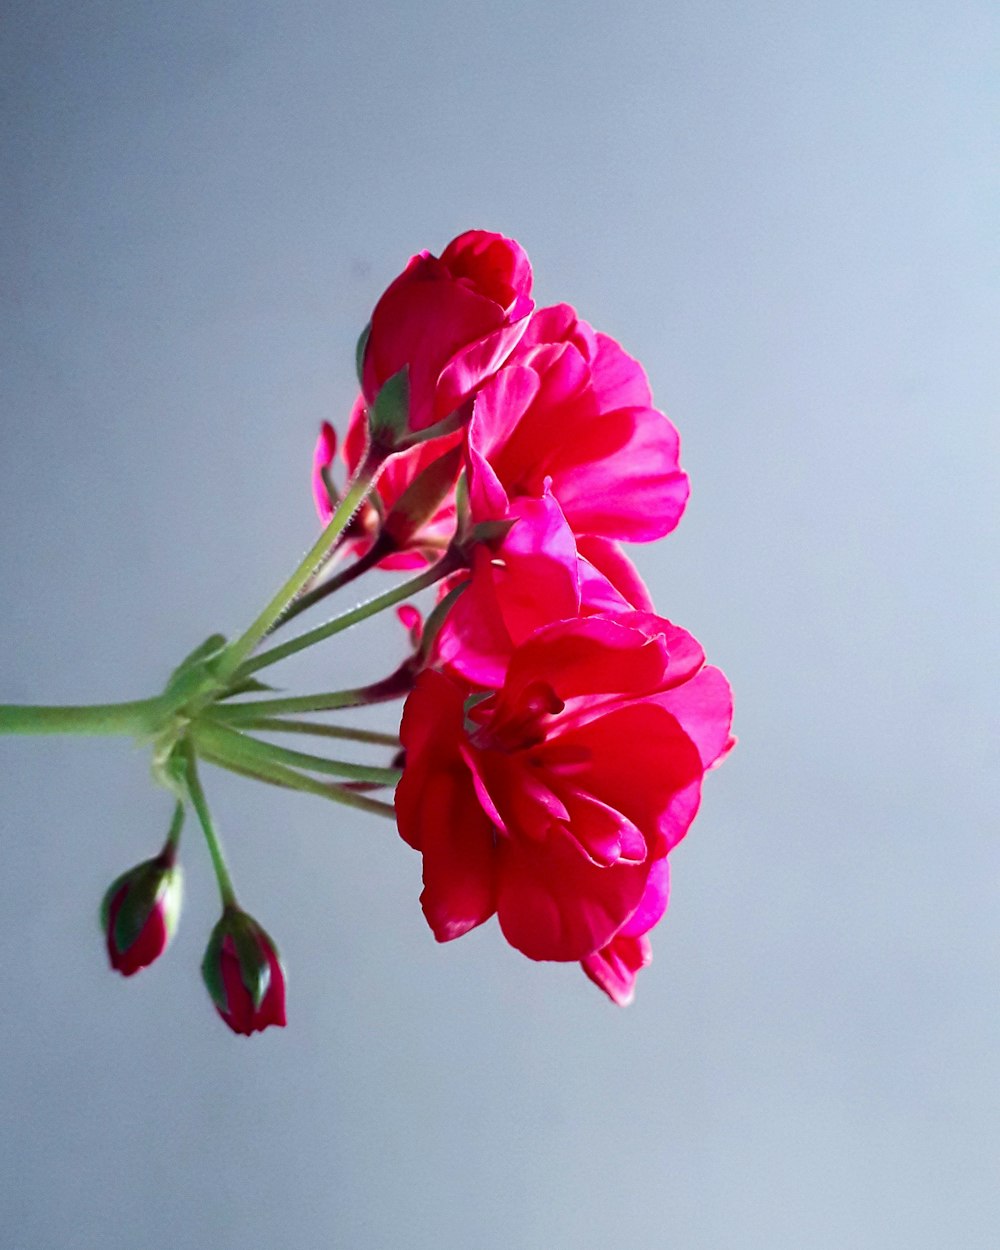 shallow focus photo of pink flowers